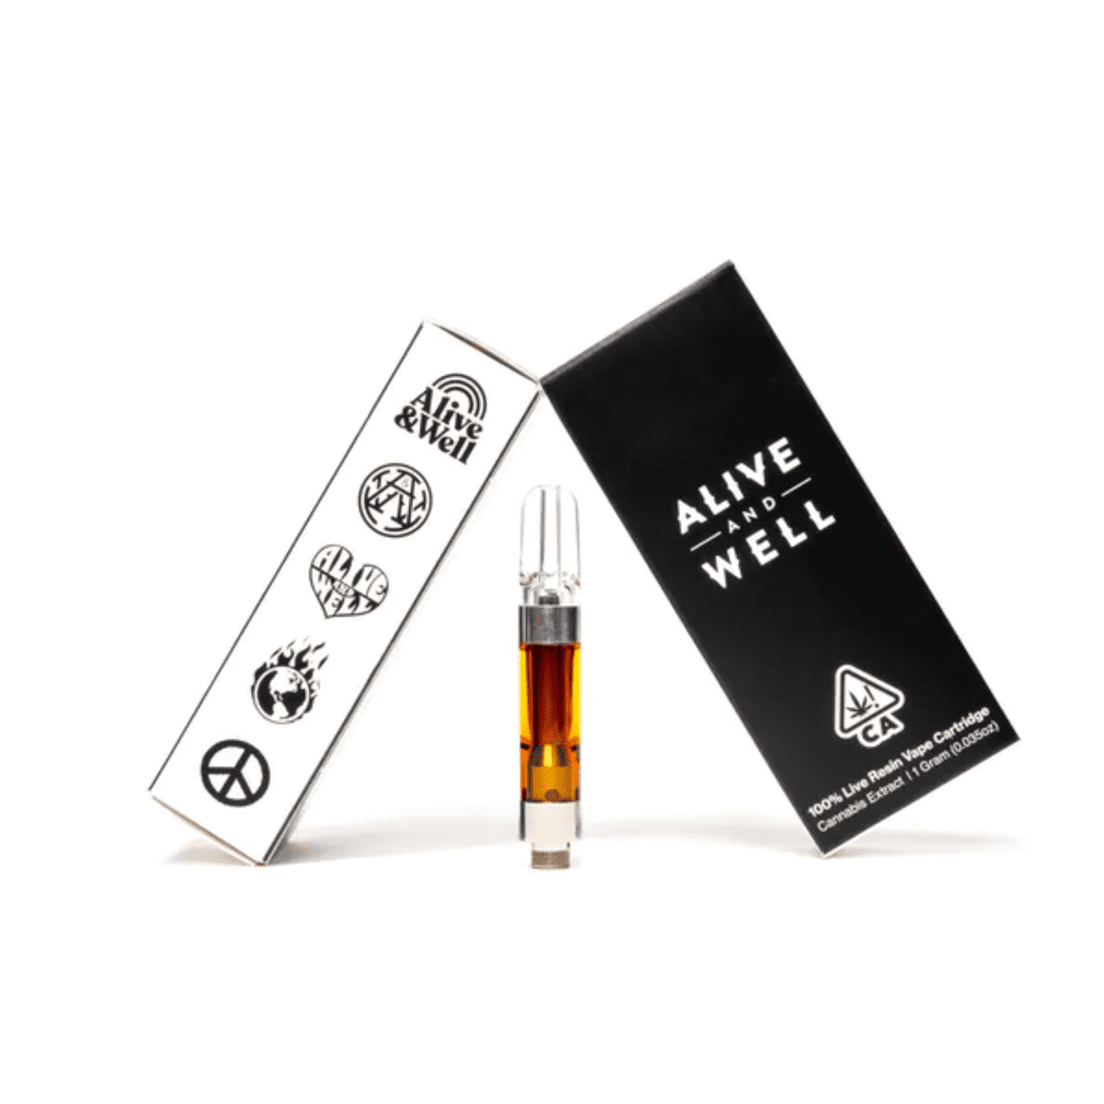 1g Mendo Breath Live Resin CART - ALIVE WELL